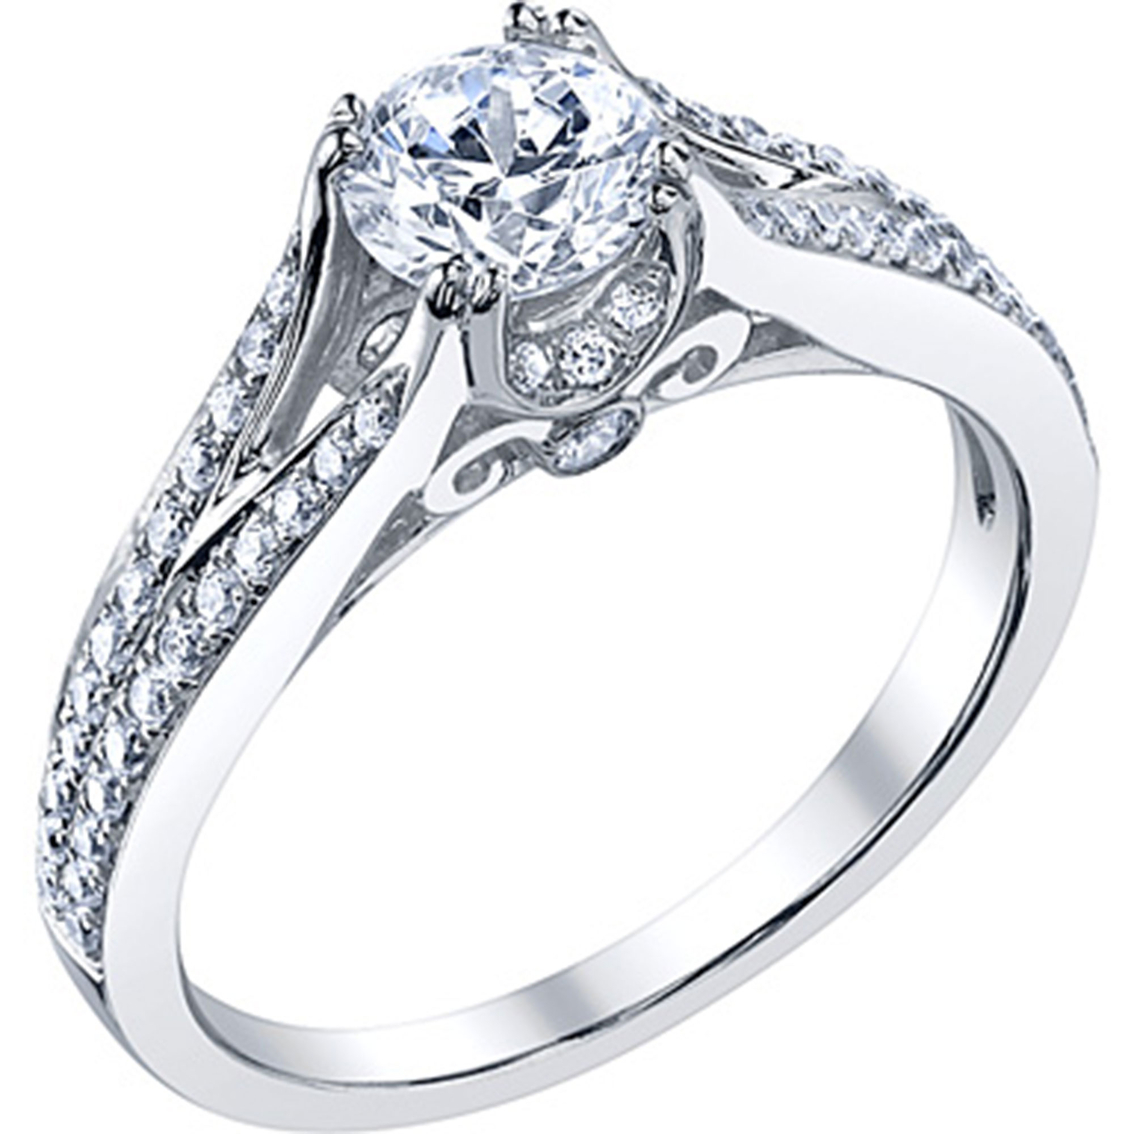 ... results exchange jewelry watches engagement wedding engagement rings